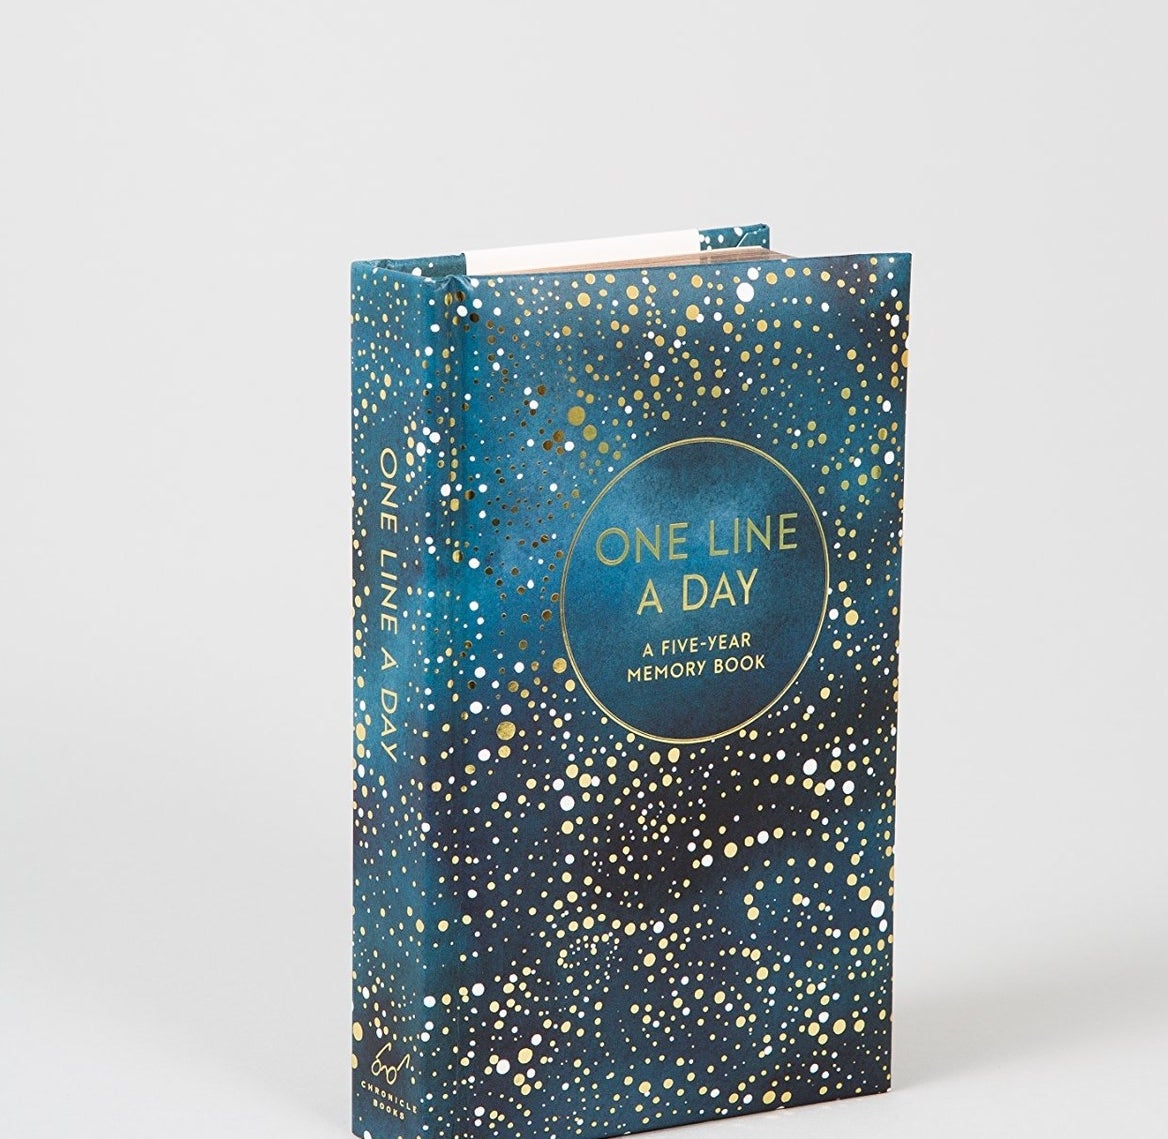 The journal with a star-like cover print